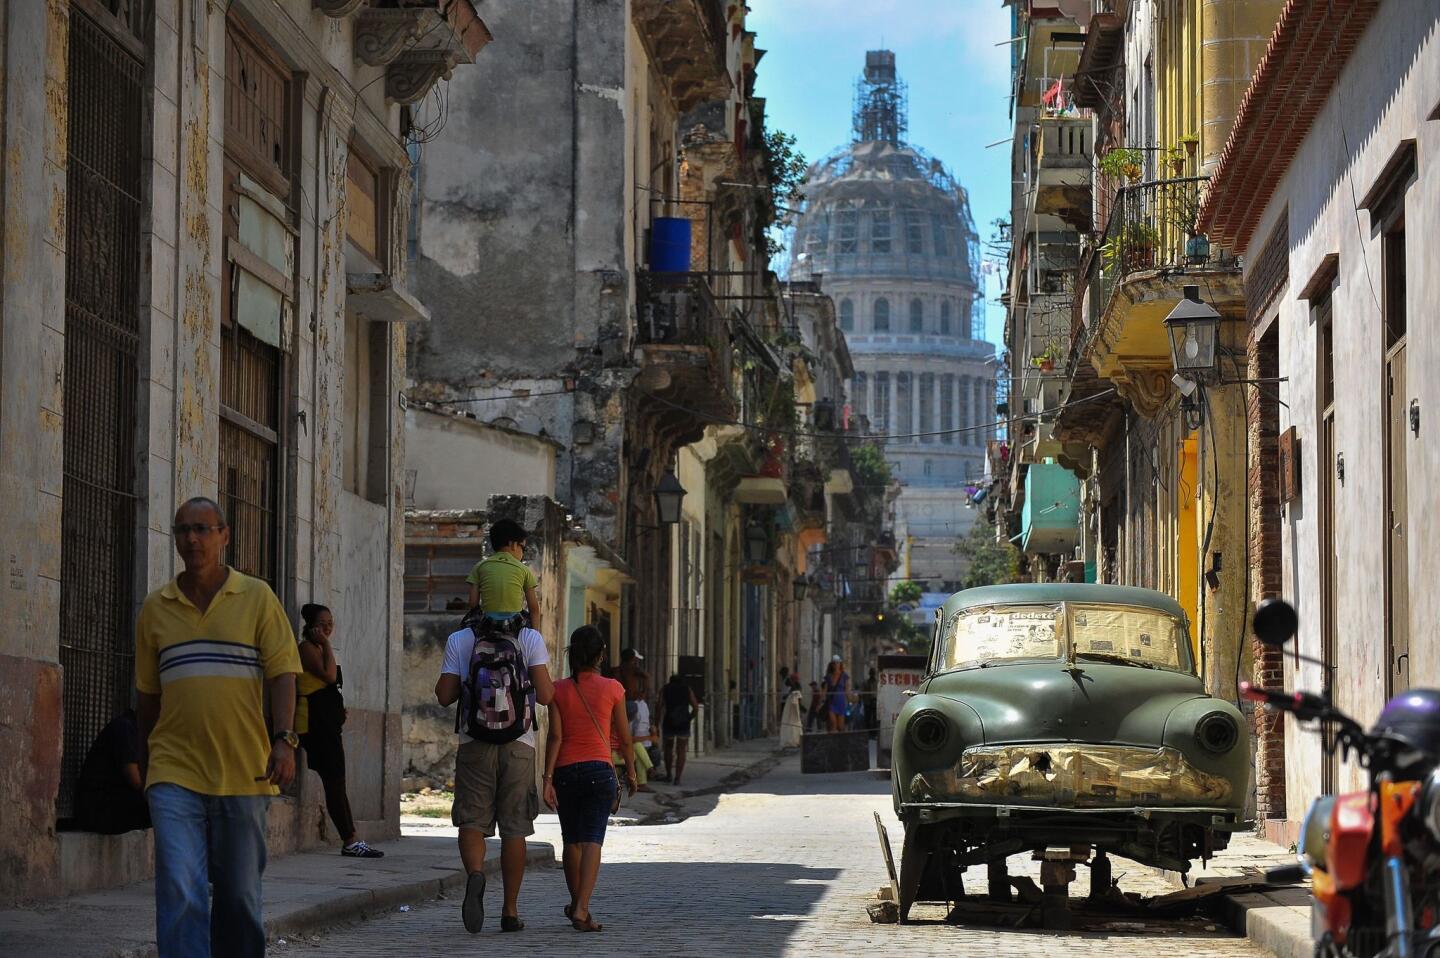 View of a street in Havana on March 17, 2016.